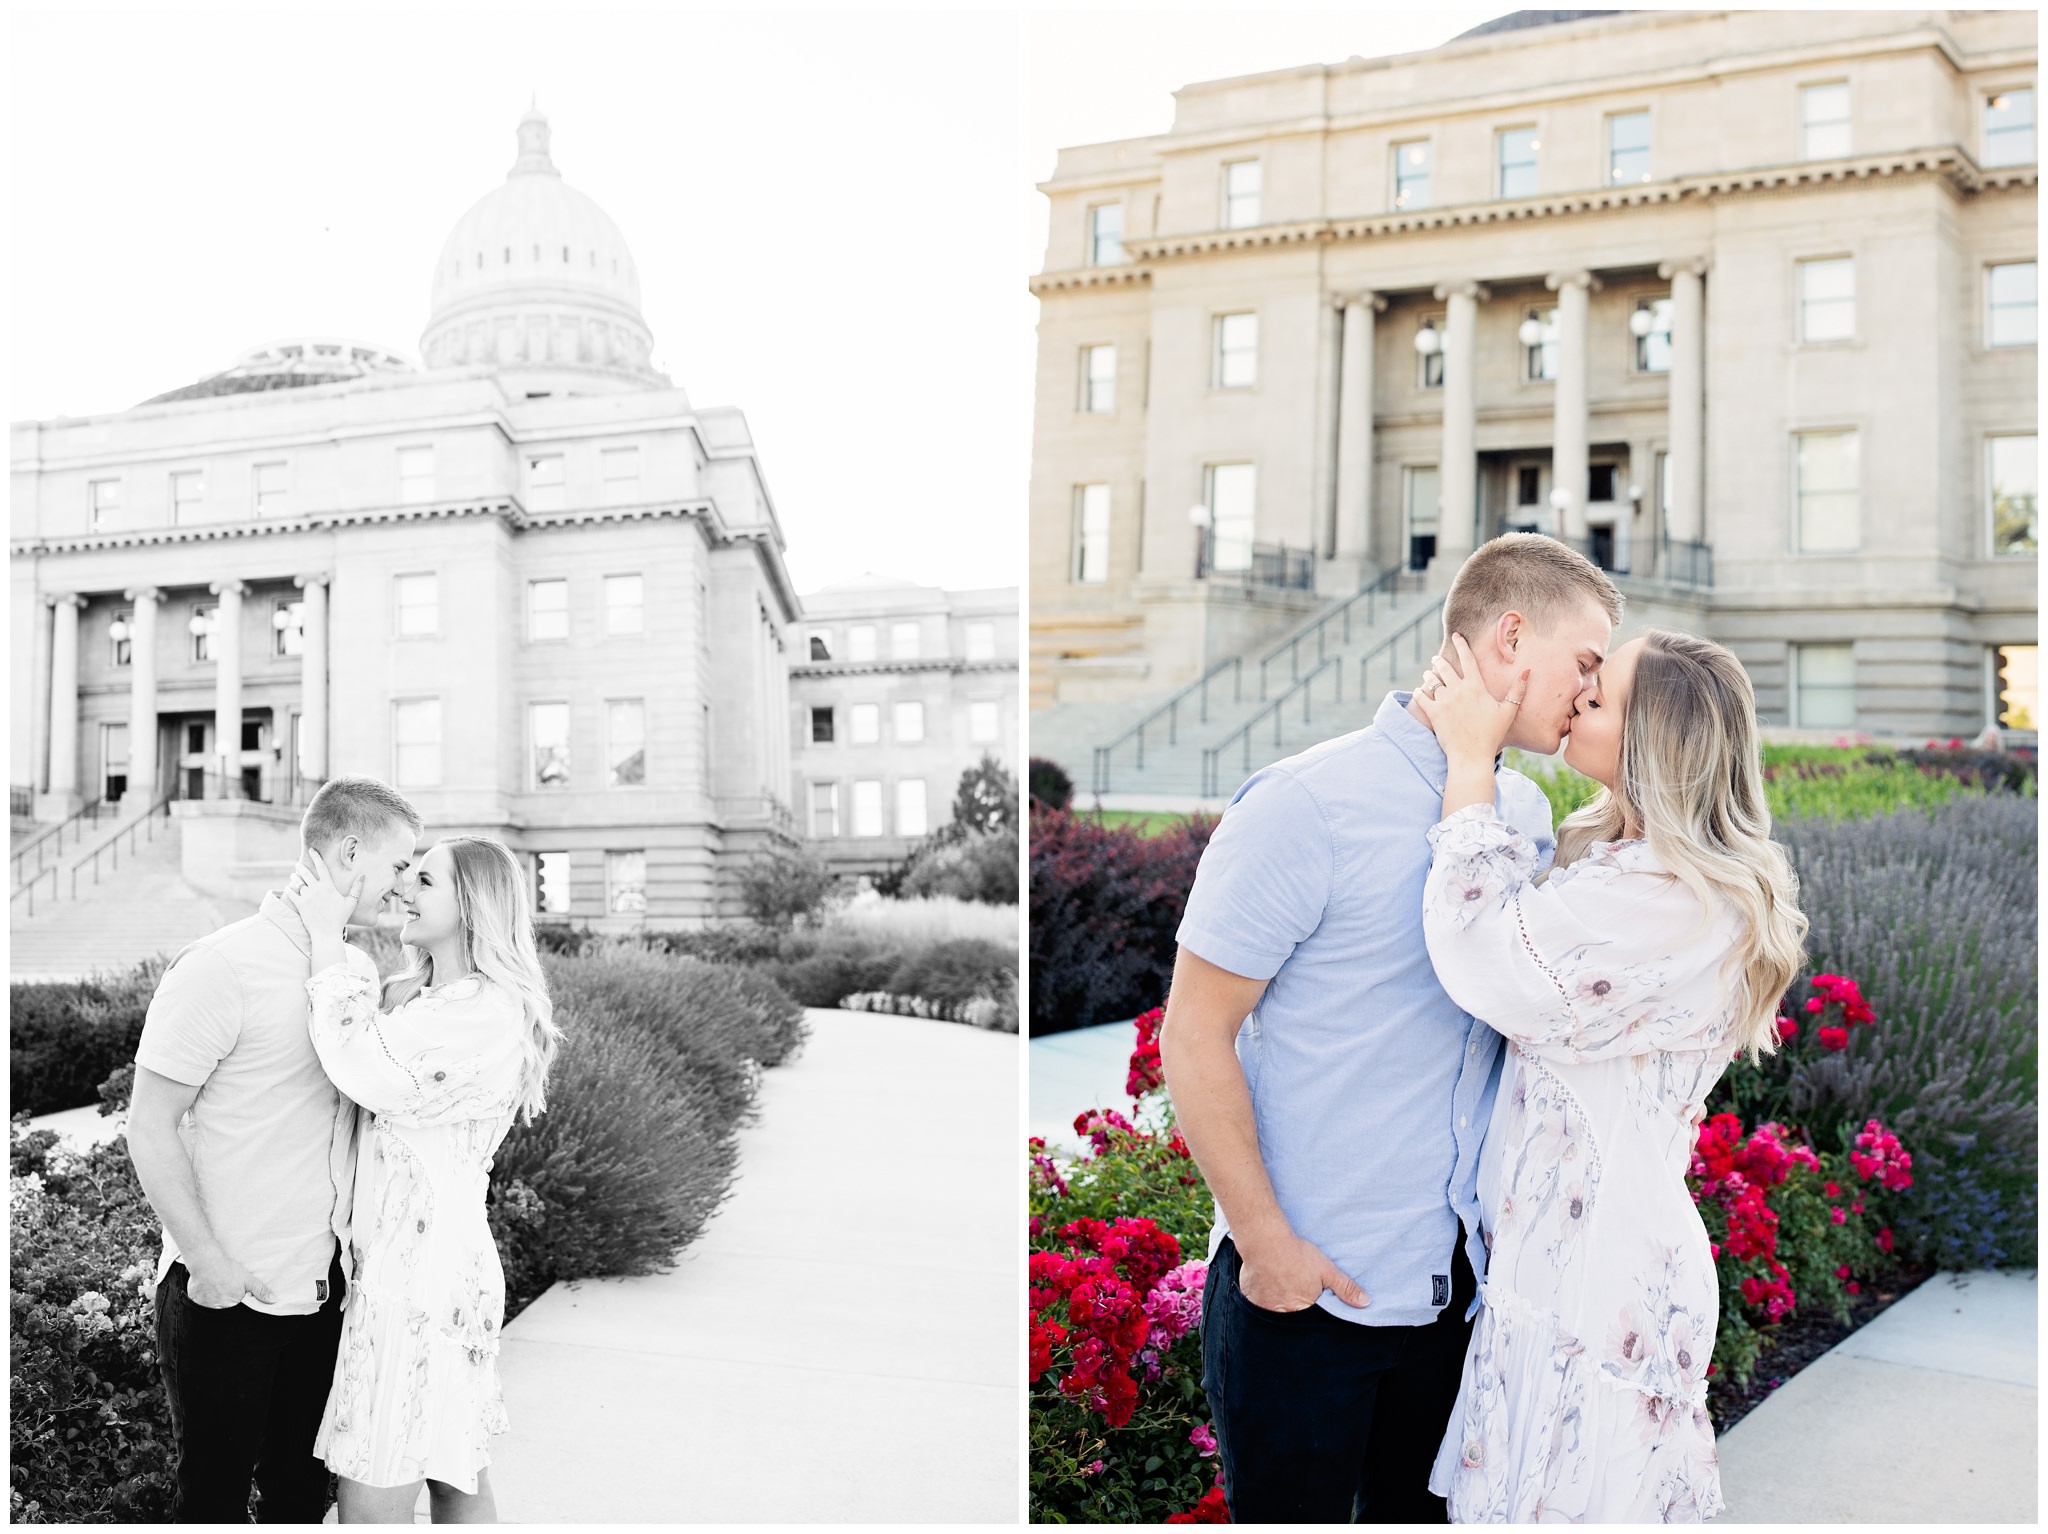 Summer engagement session in downtown boise